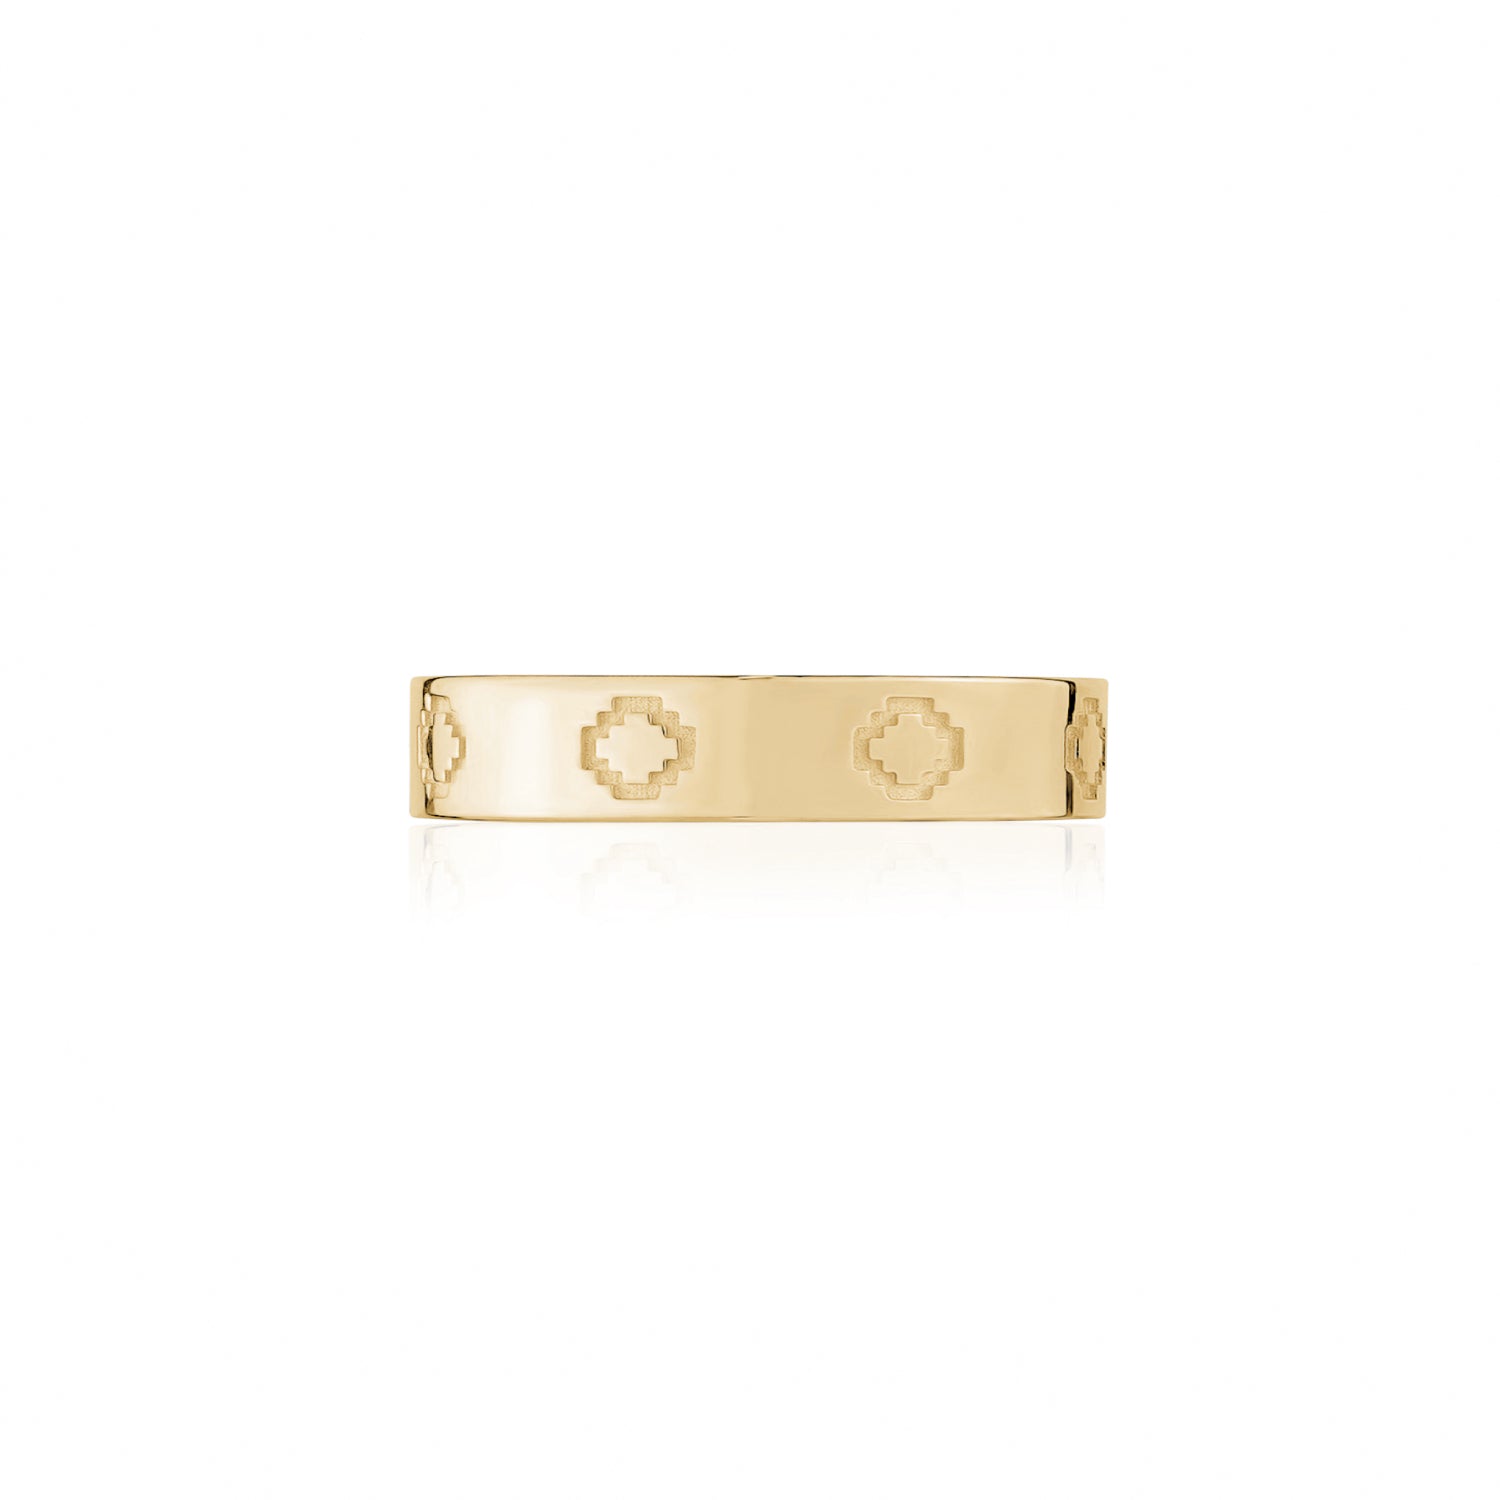 Step Motif Polished Finish Square Edge Wedding Band in Yellow Gold